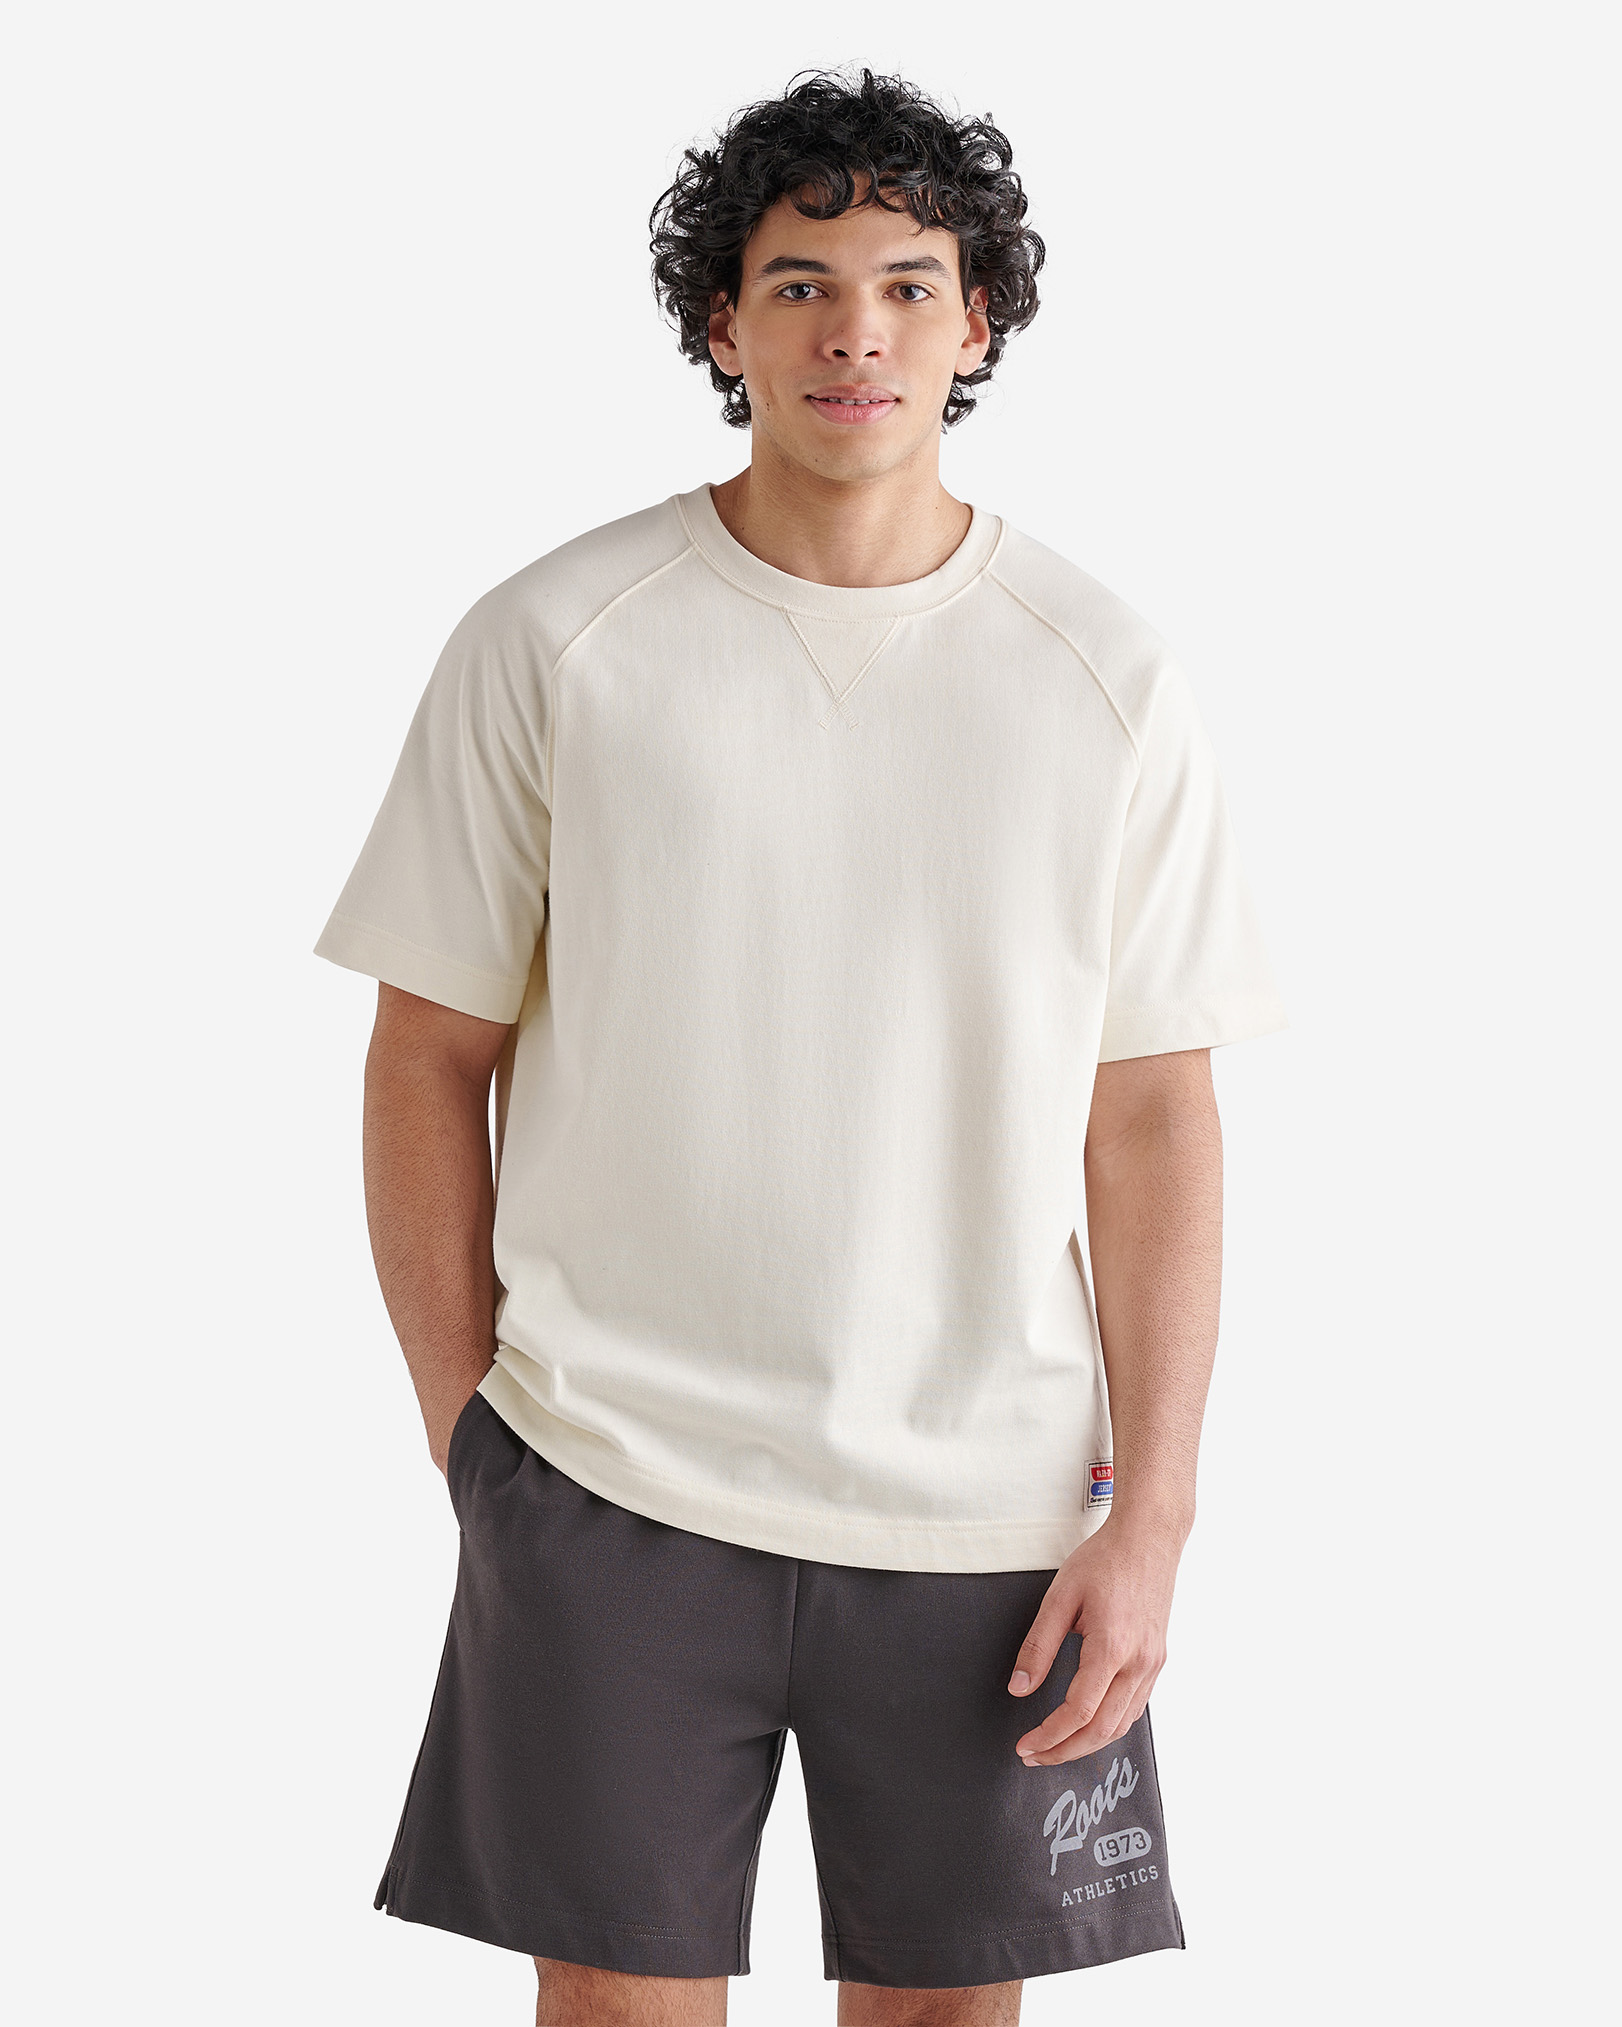 Roots Warm-Up Jersey Short Sleeve T-Shirt in Vanilla Ice